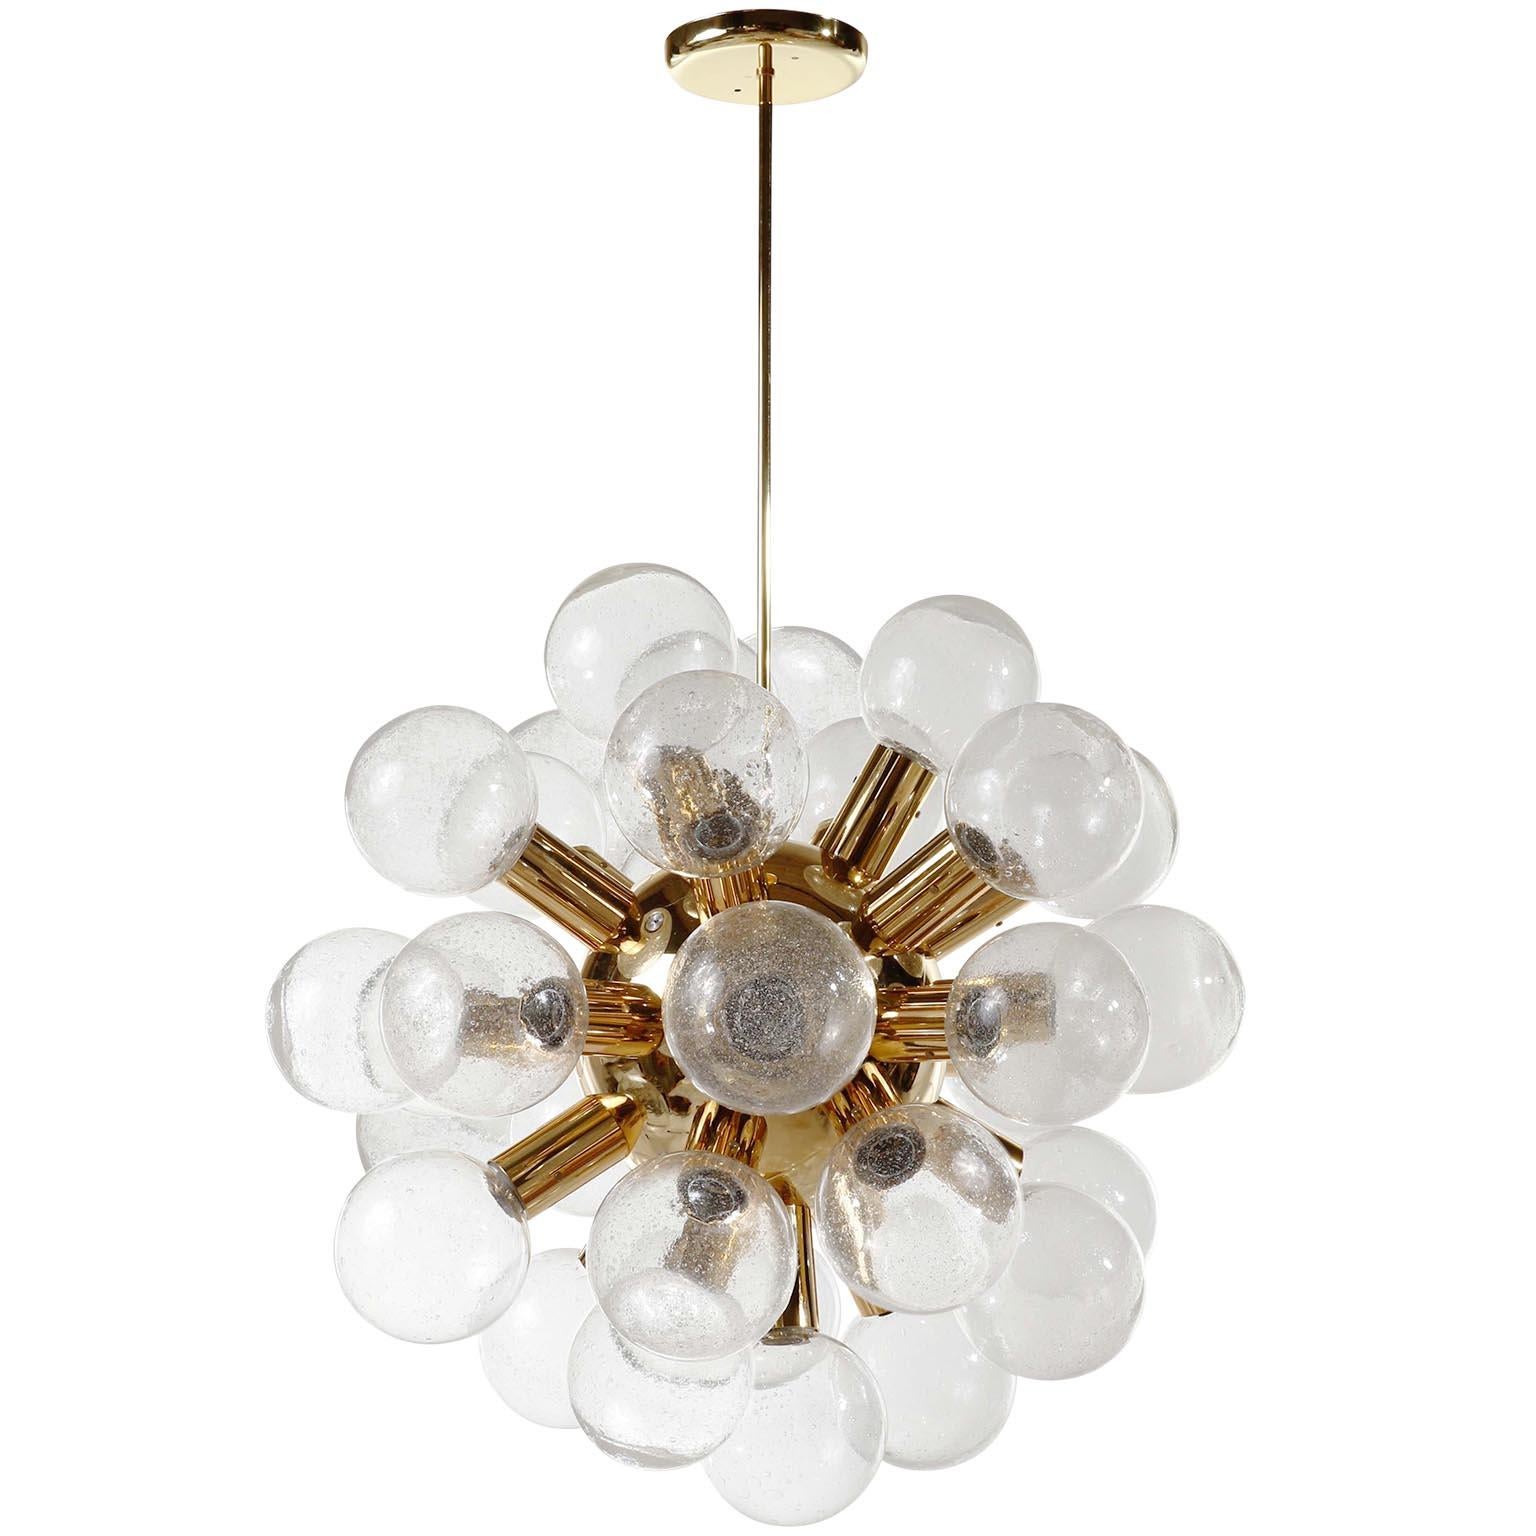 A rare and large 27-arm atomic chandelier or pendant light model 'RS 27 Kugel HL' by J.T. Kalmar, Austria, manufactured in midcentury, circa 1970 (late 1960s or early 1970s).
It is made of brass plated aluminum and 27 handblown bubble glass lamp